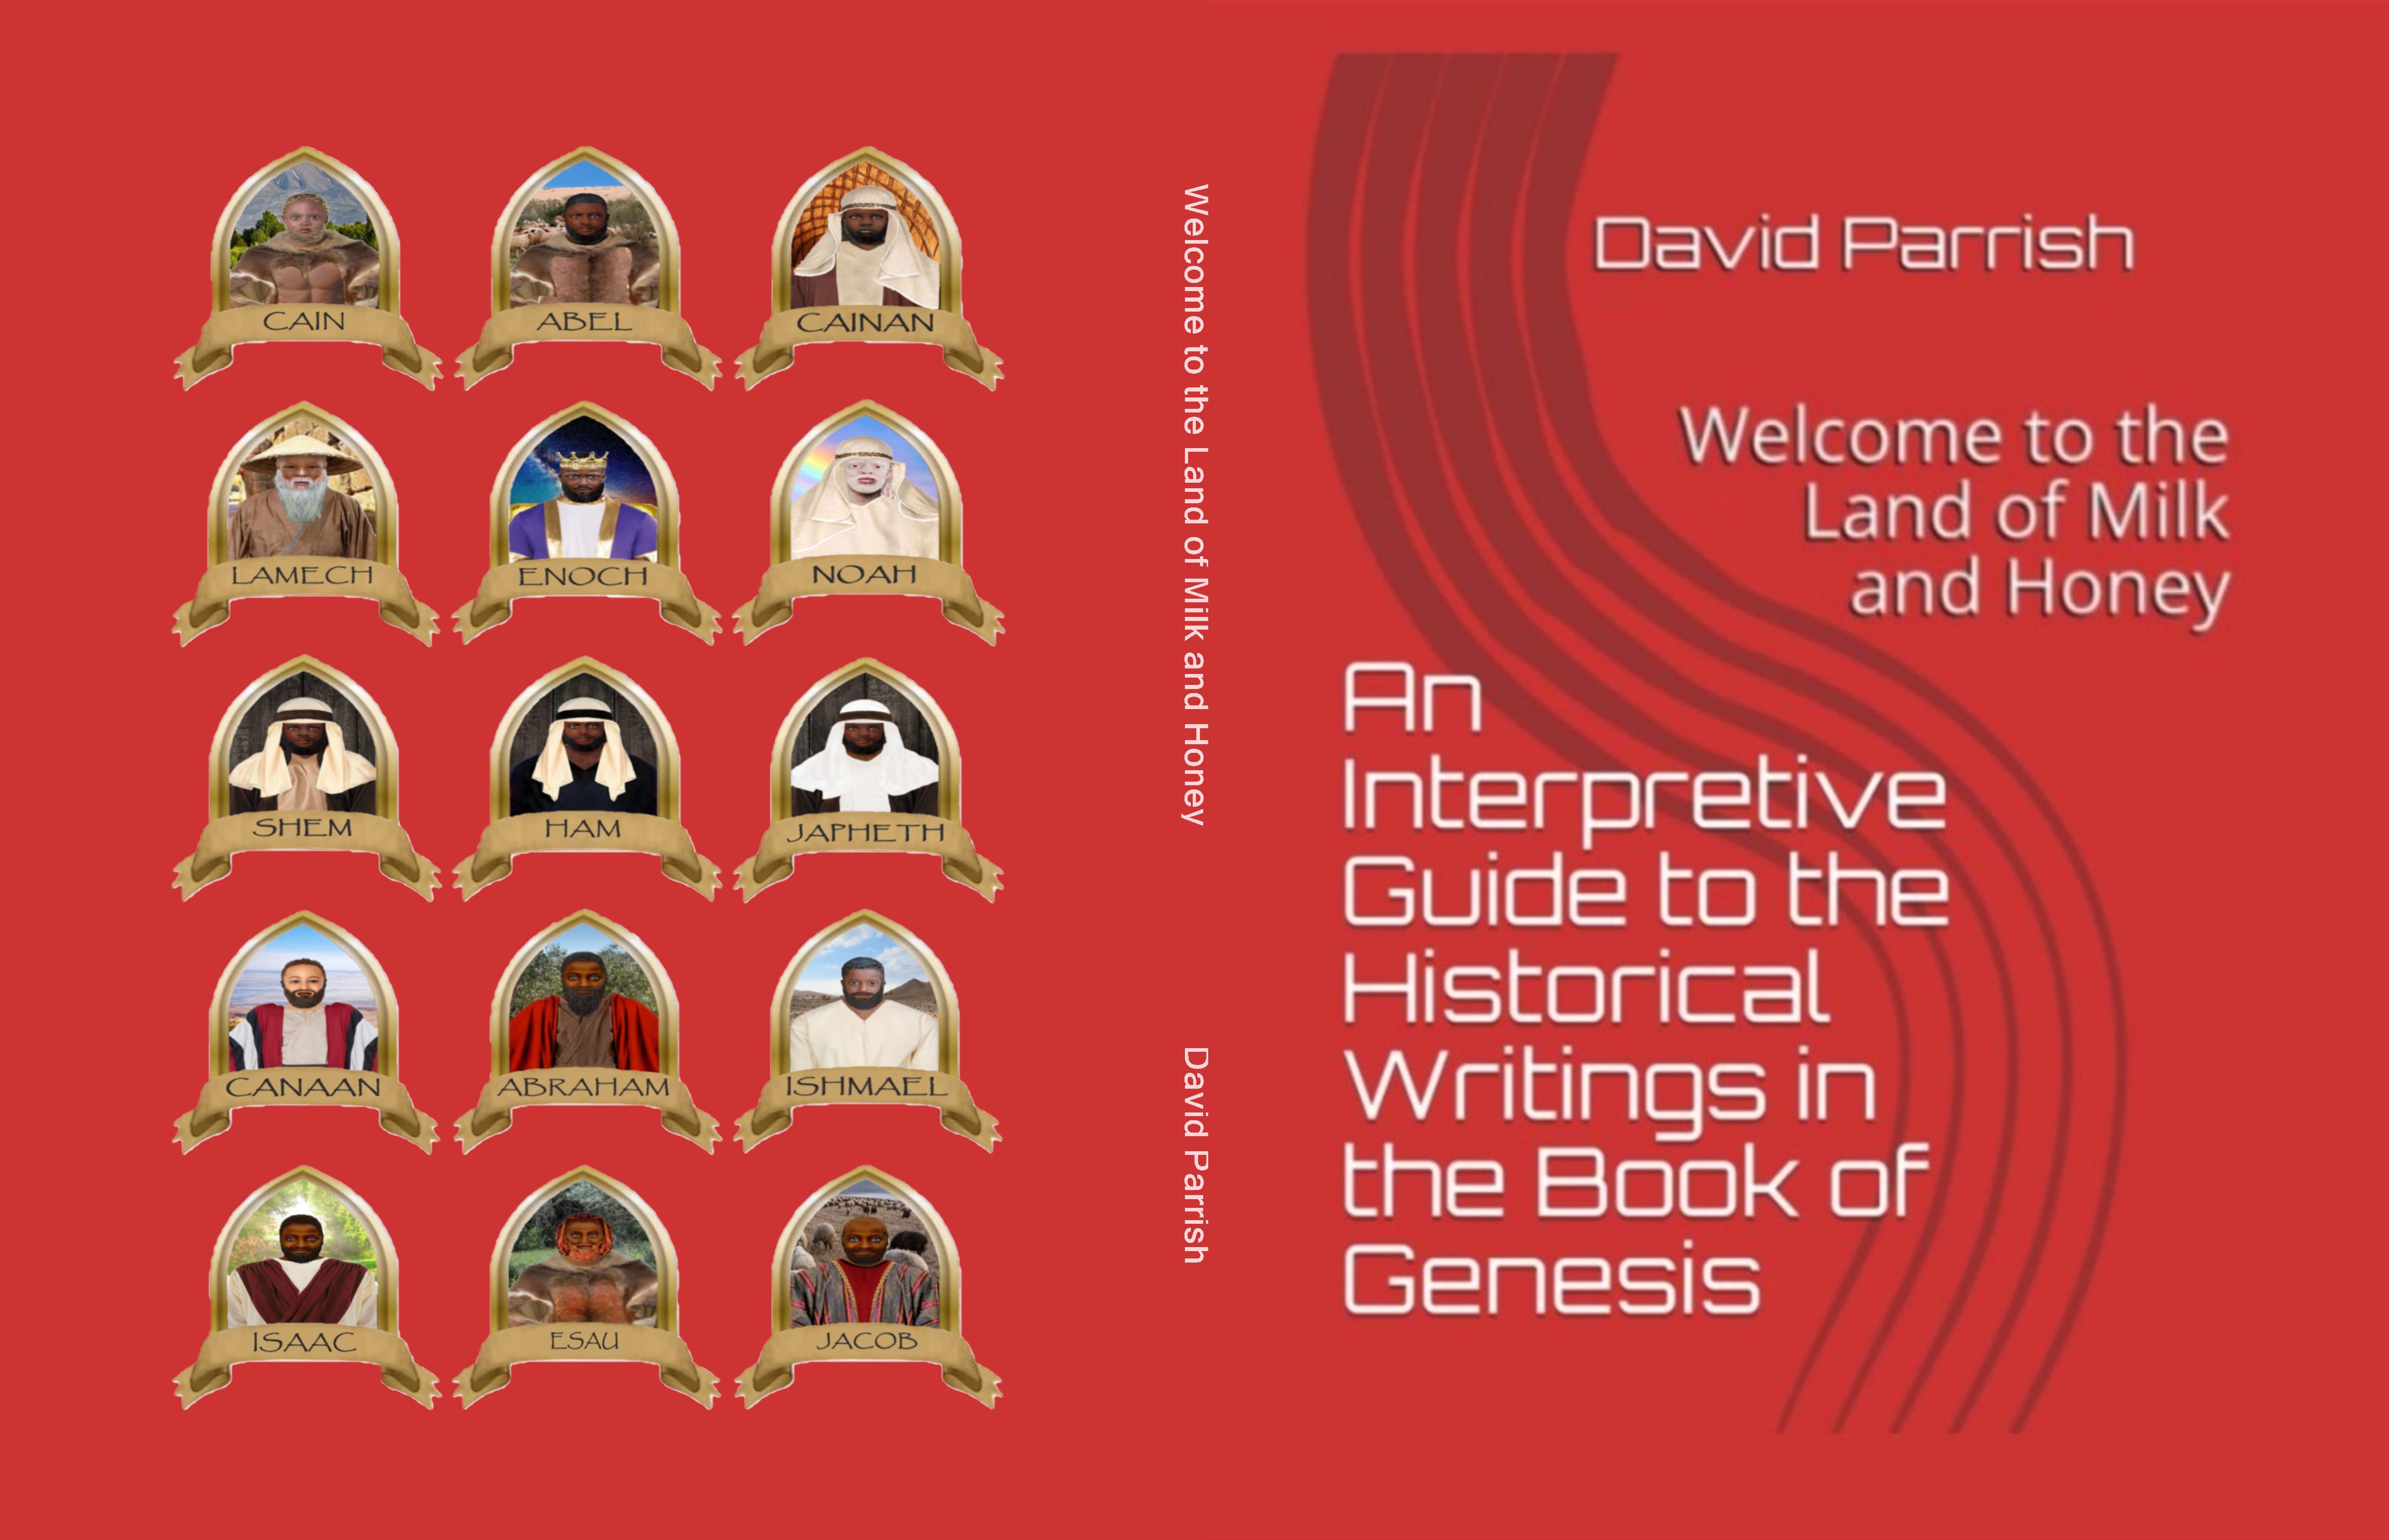 An Interpretive Guide to the Historical Writings in the Book of Genesis - Welcome to the Land of Milk and Honey cover image